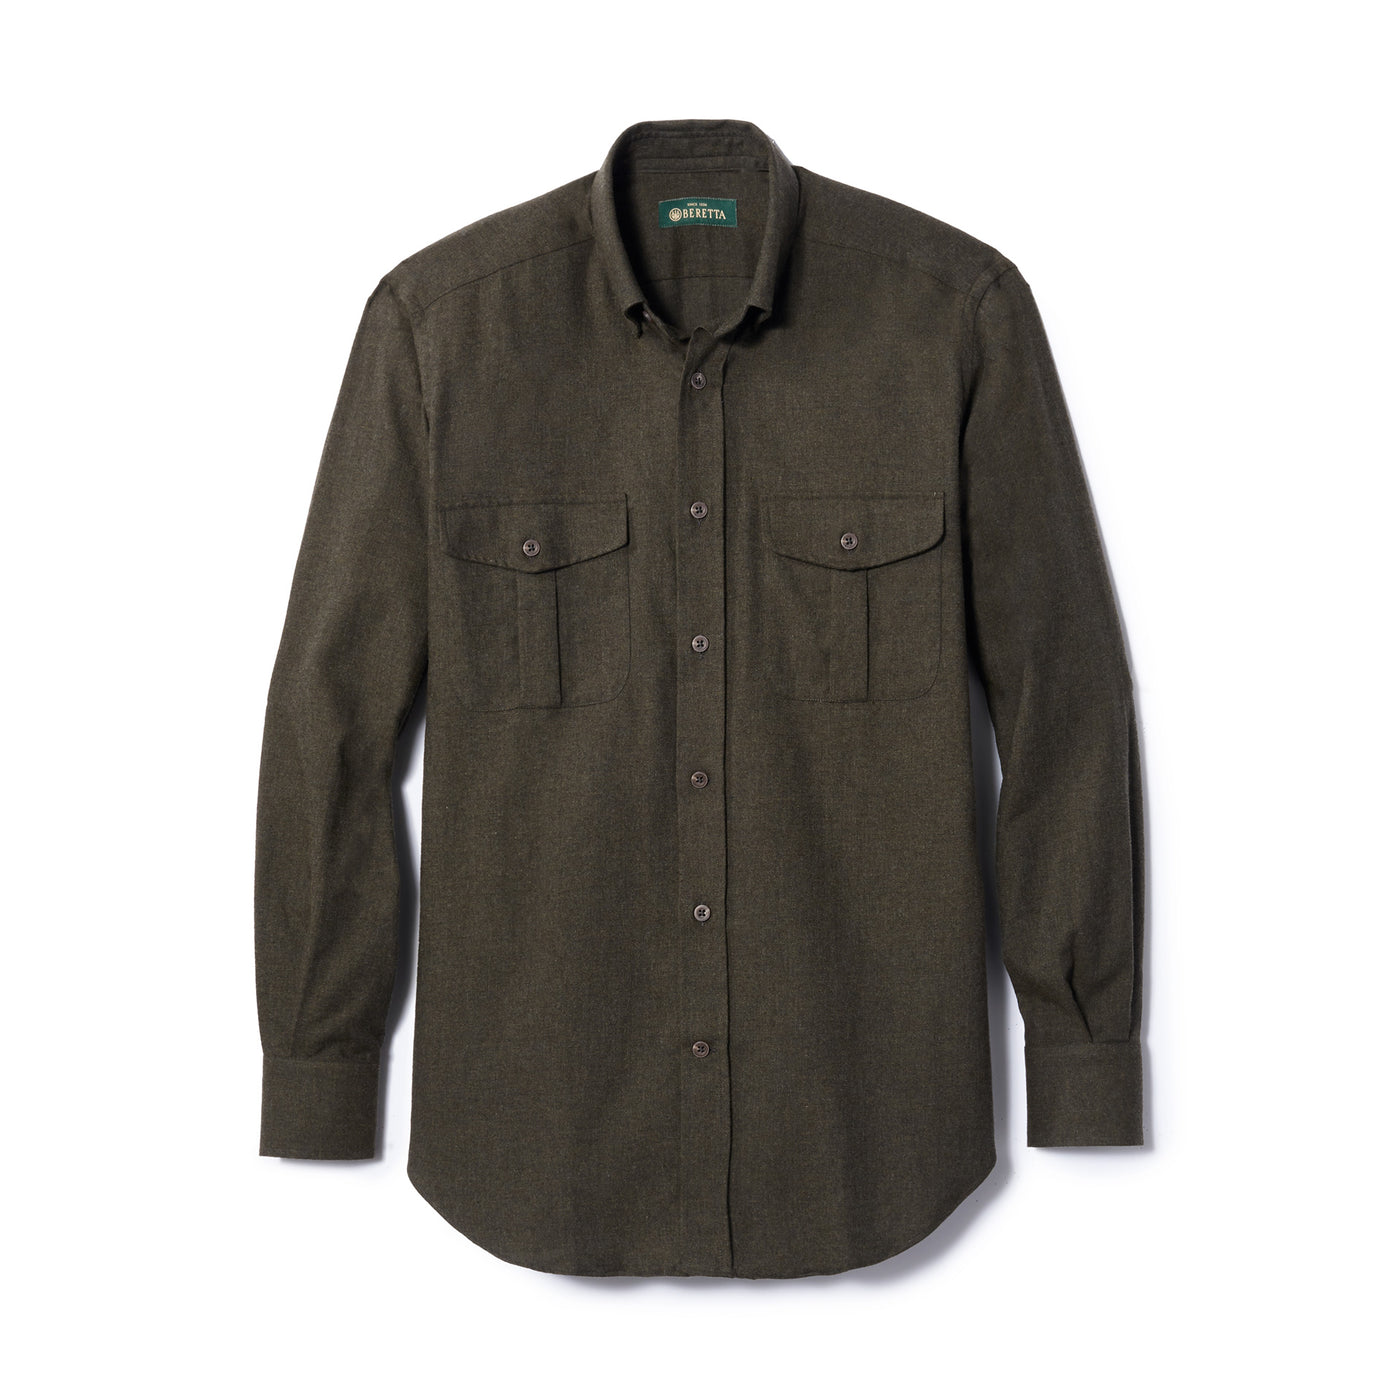 Brushed Cotton Twill Luc Due Shirt - Dark Forest